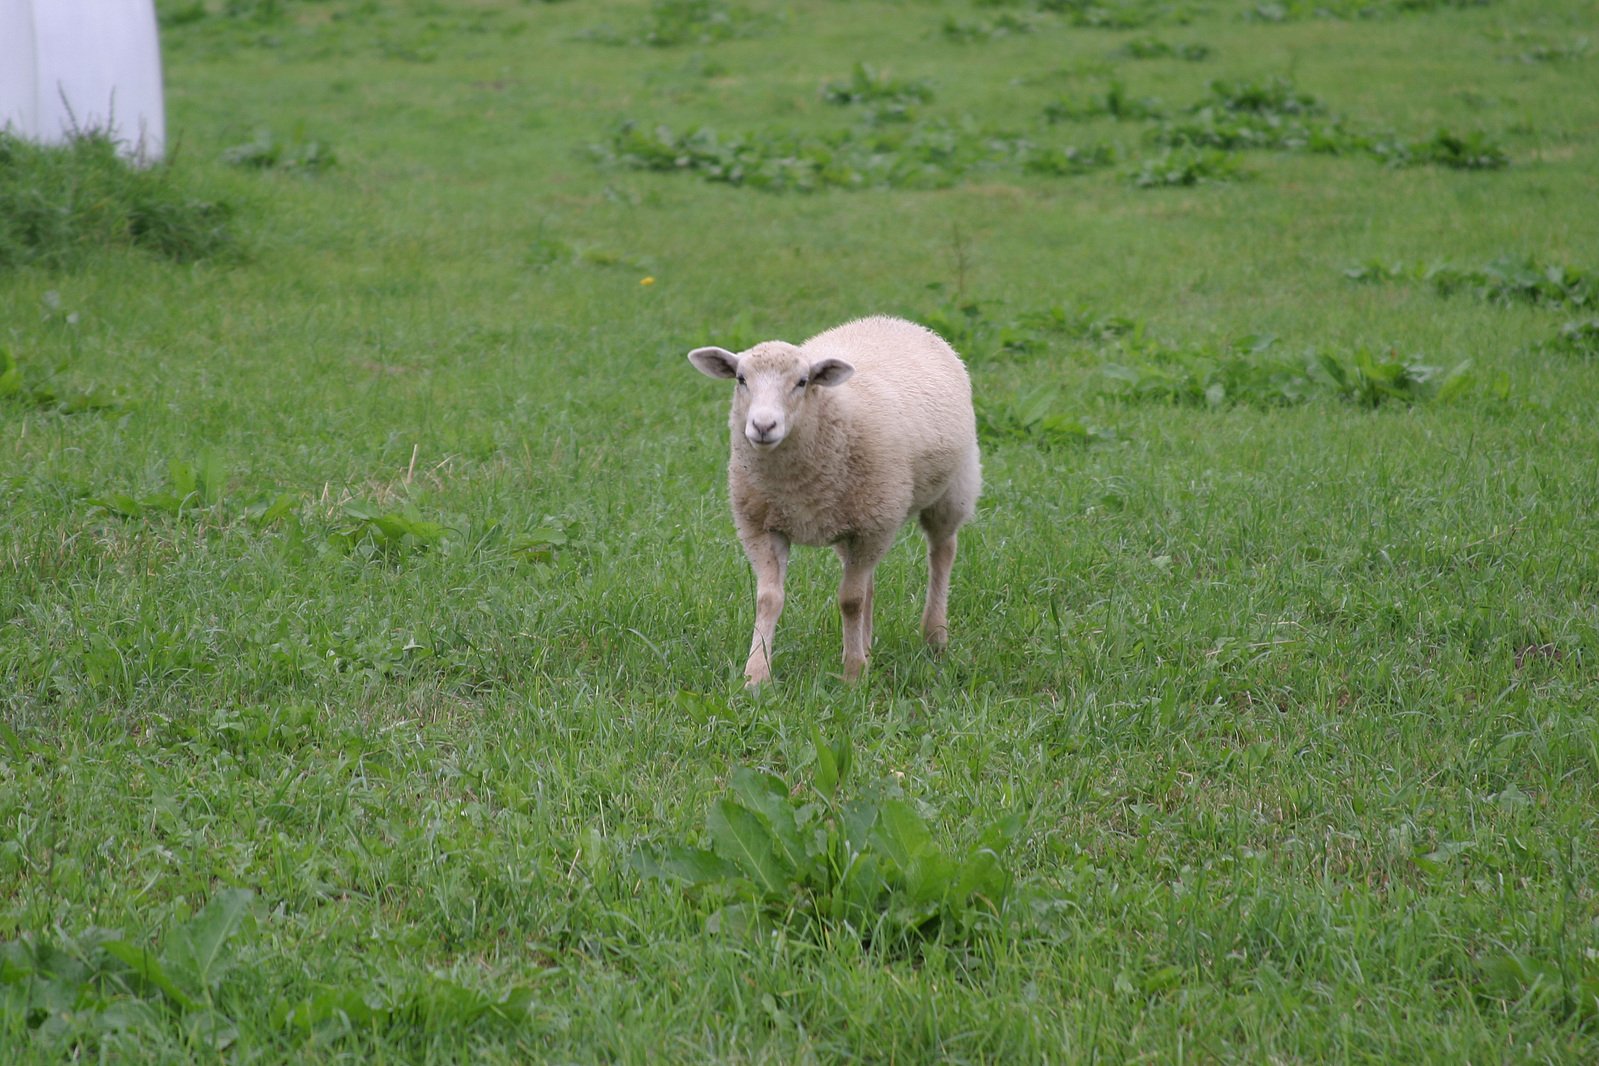 a sheep standing on a lush green field